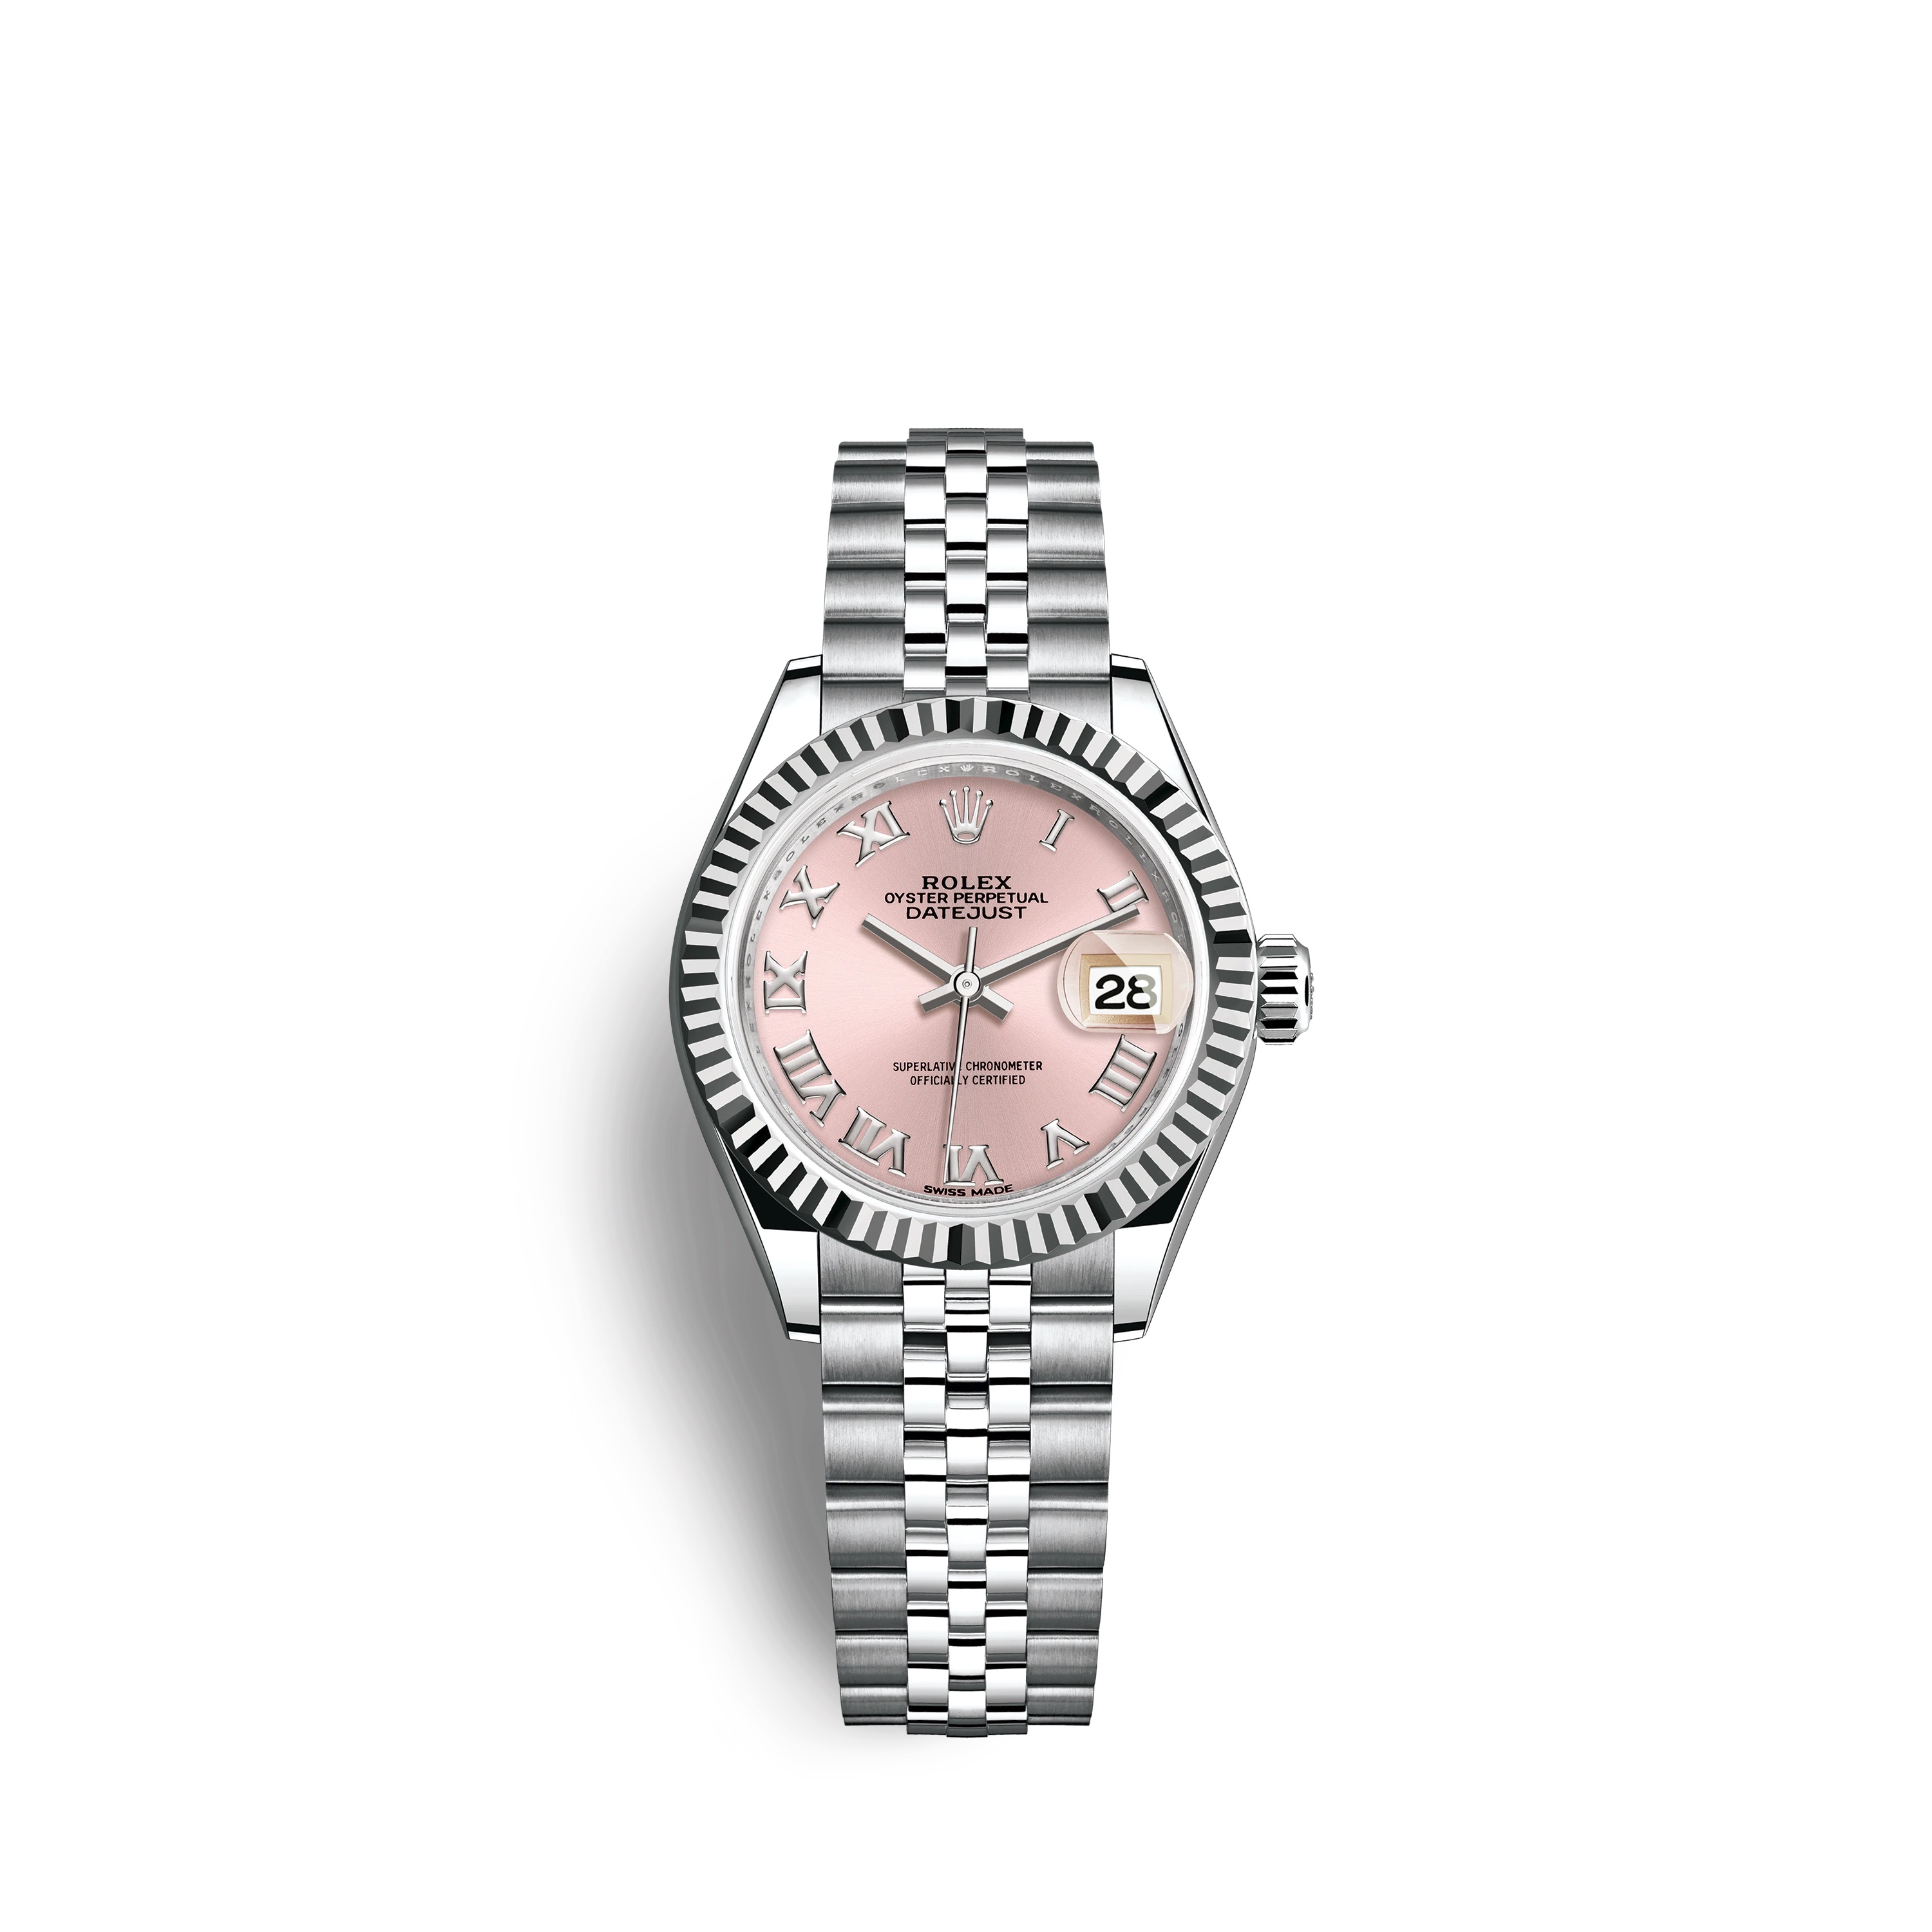 Lady-Datejust 28 279174 White Gold & Stainless Steel Watch (Pink)